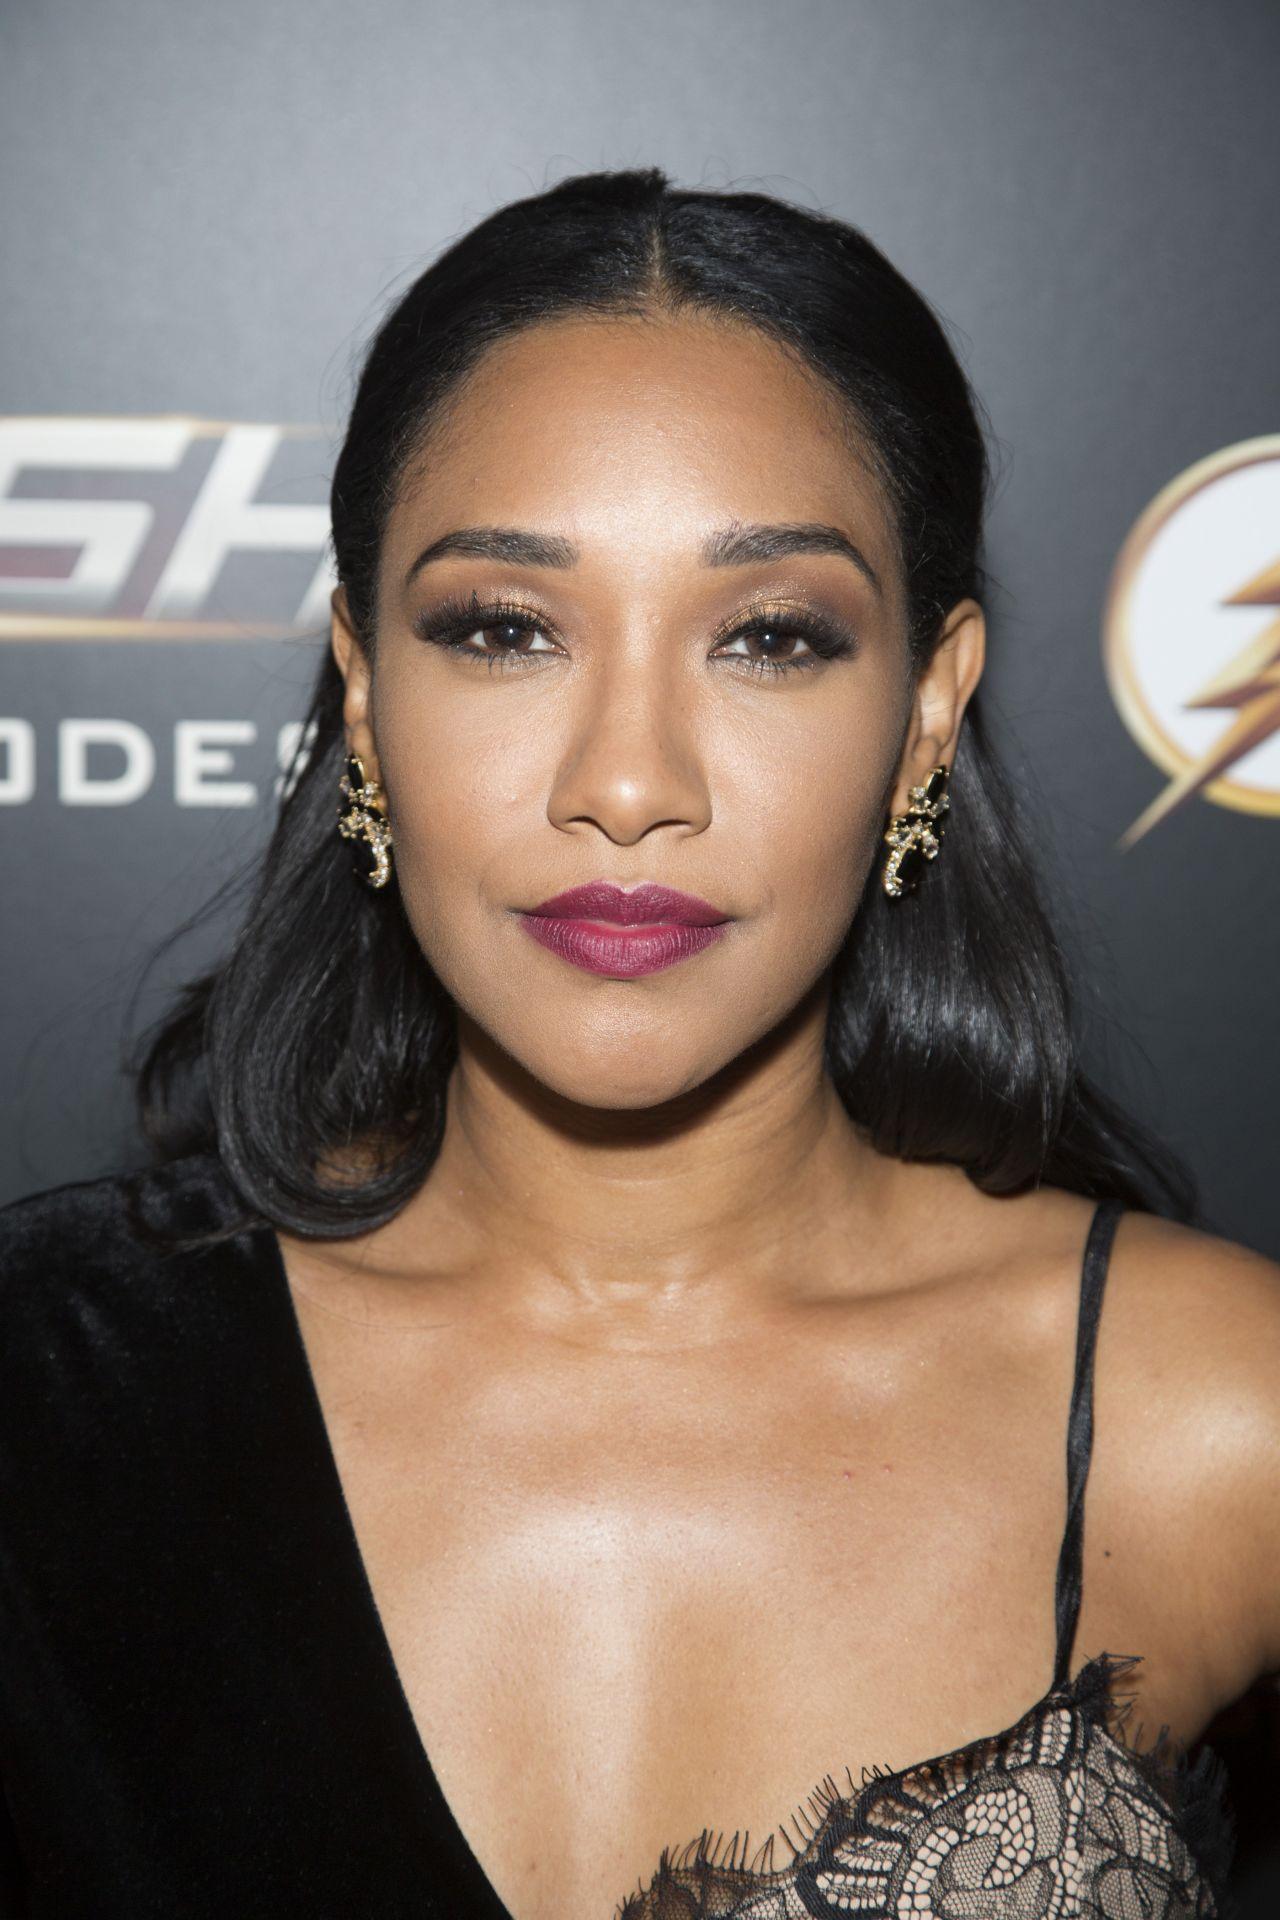 70+ Hot Pictures Of Candice Patton Who Plays Iris West In Flash TV Series 211